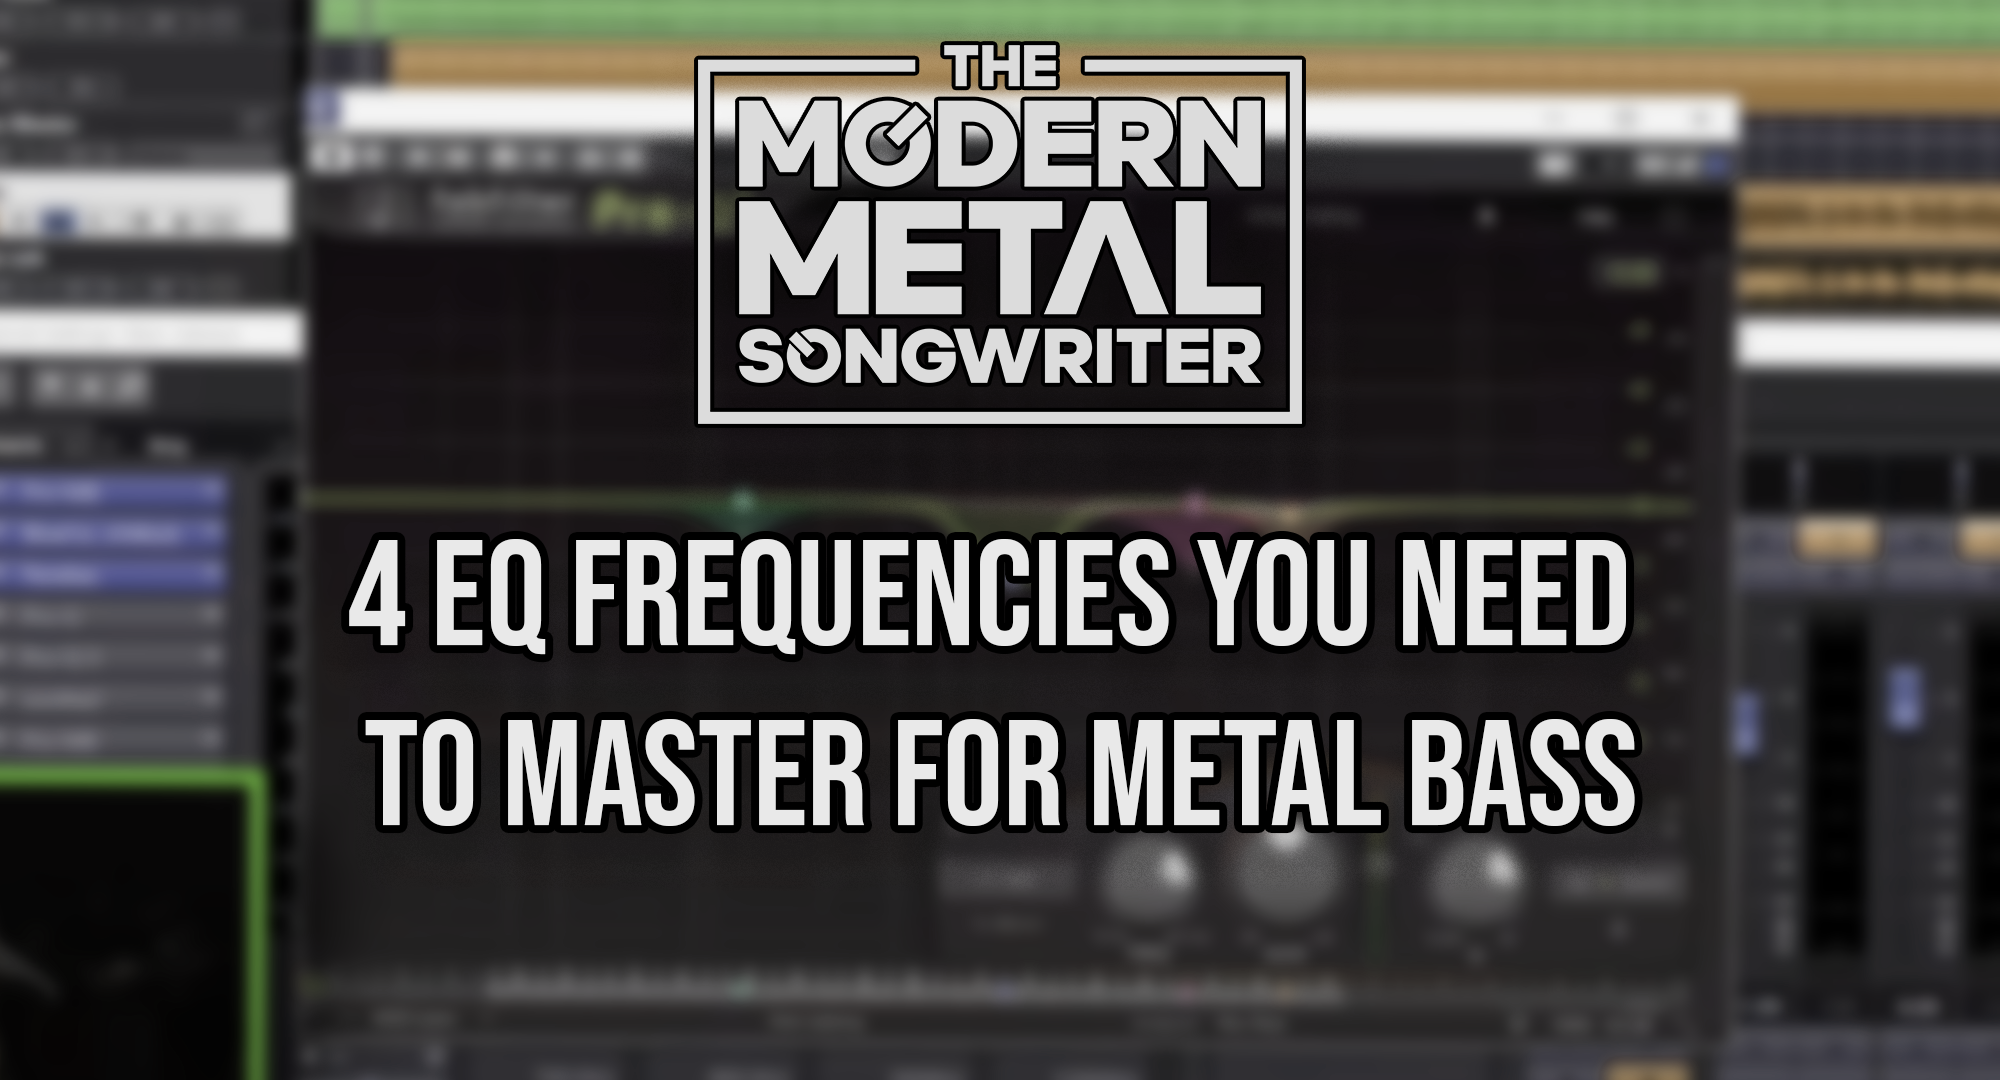 4 EQ Frequencies You Need to Master for Metal Bass